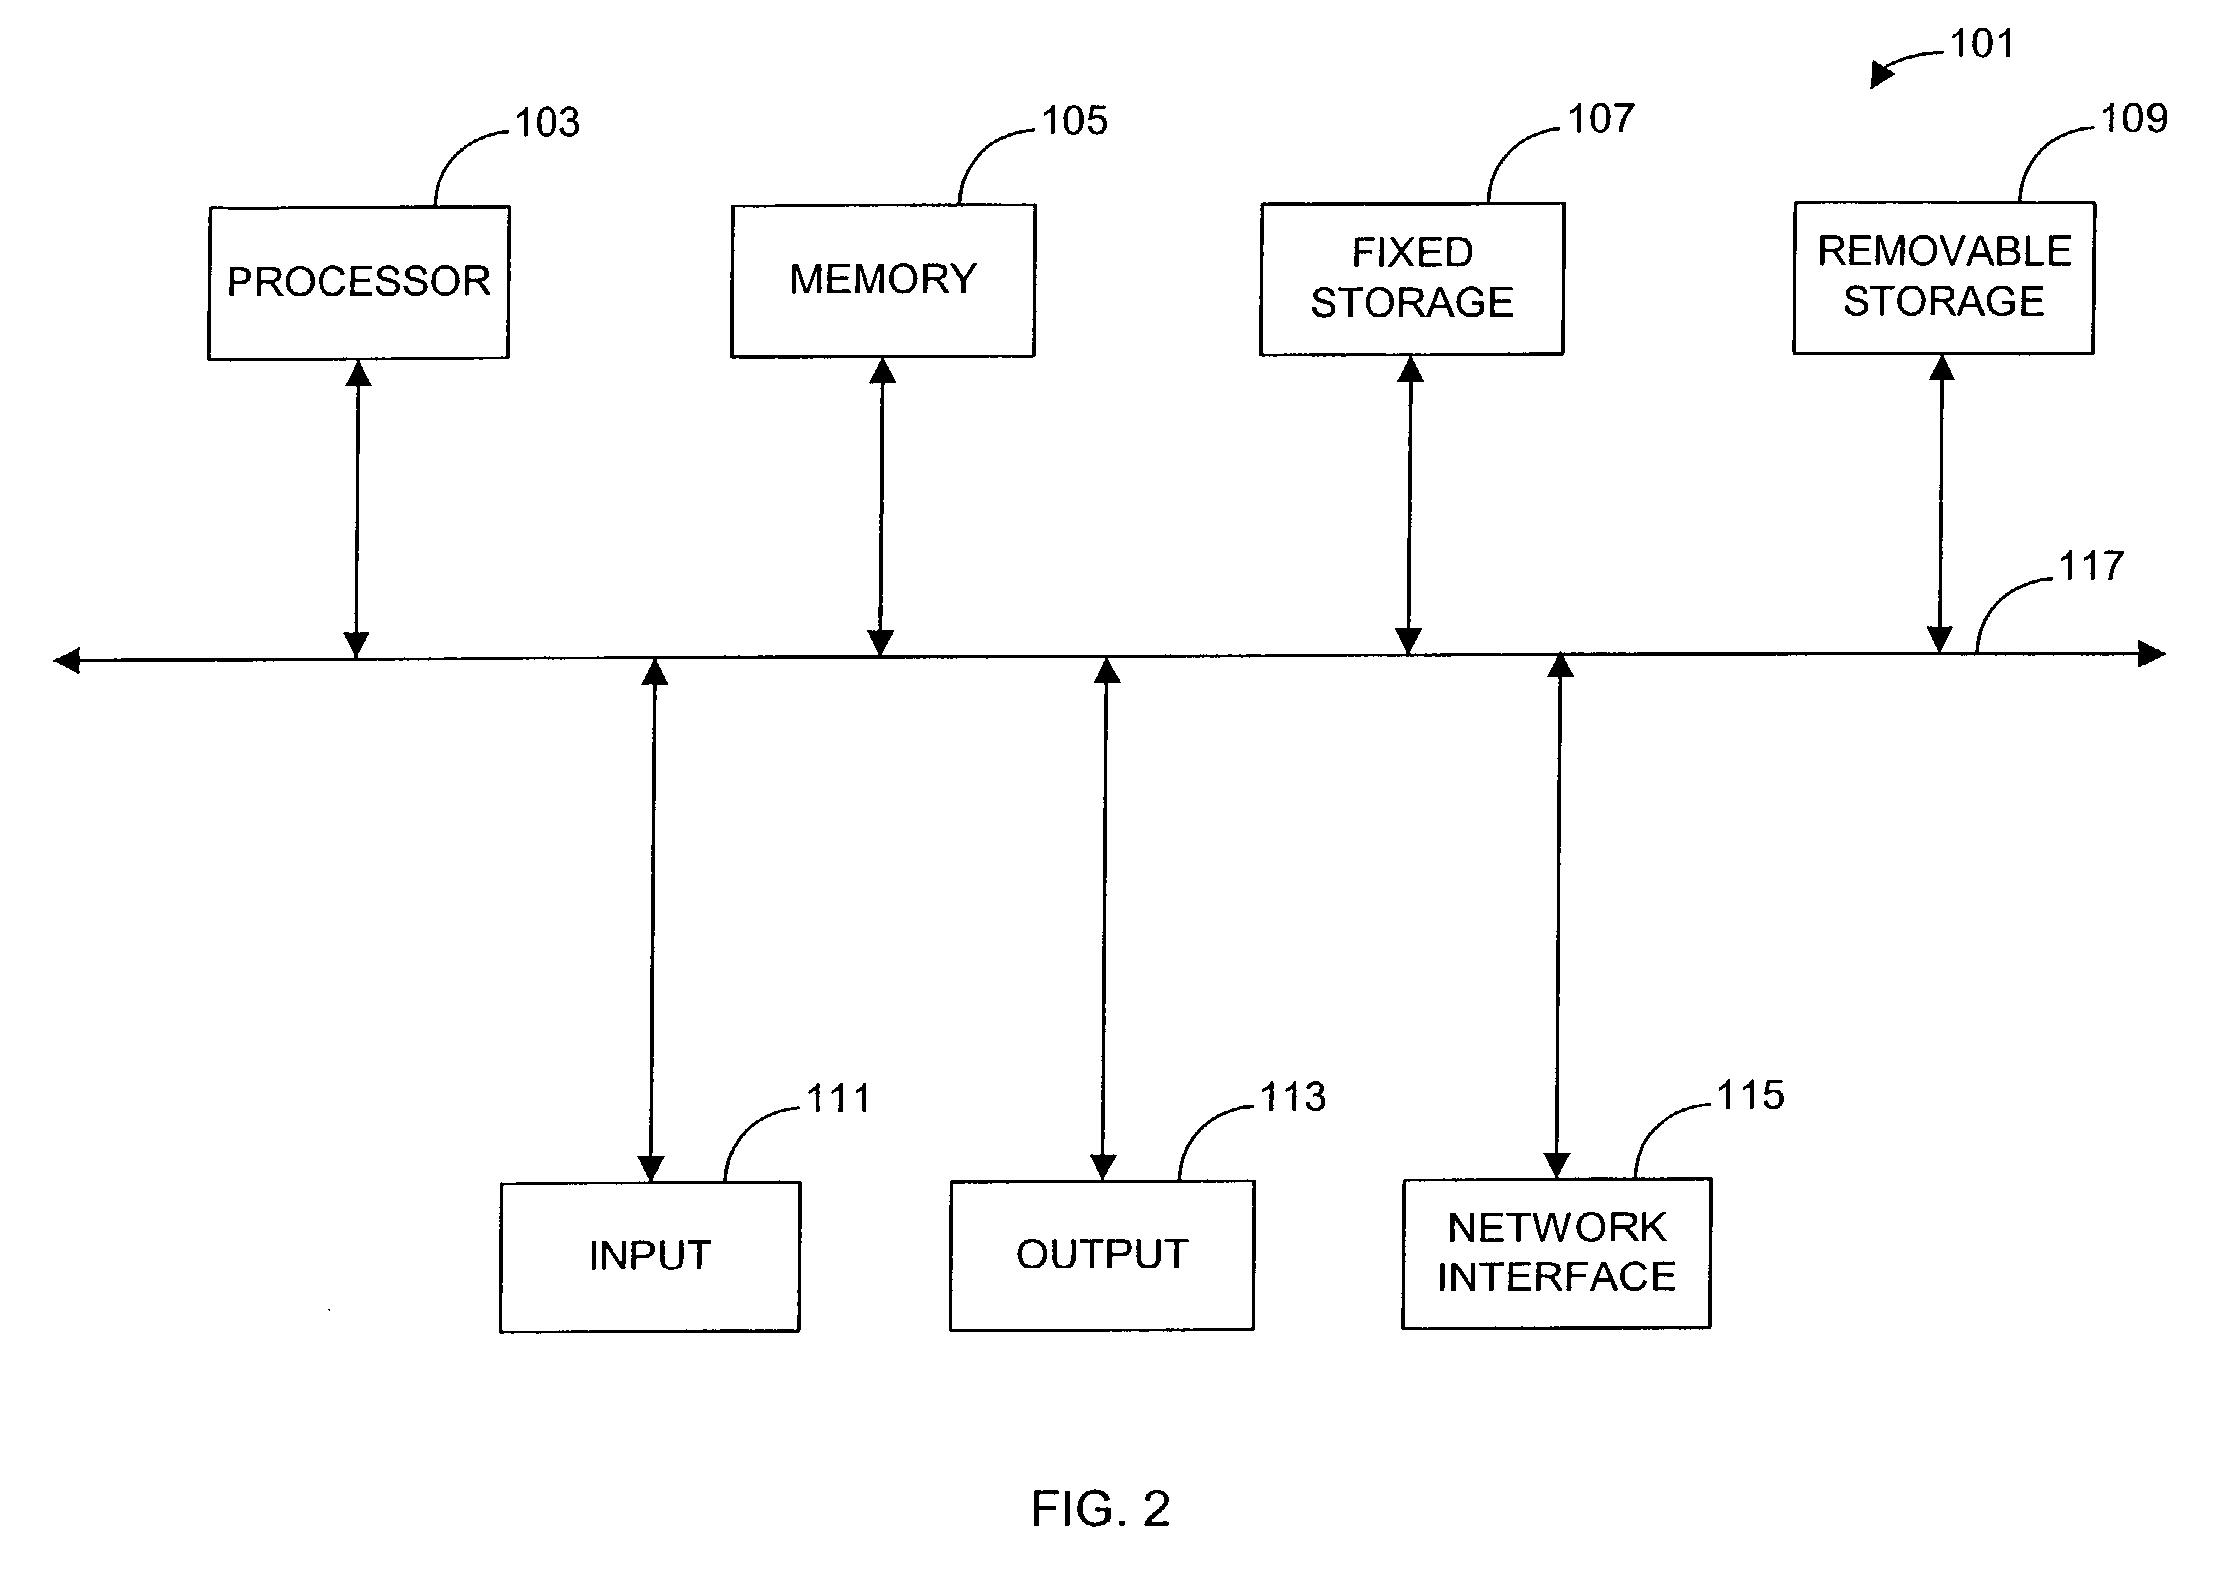 Undrop objects and dependent objects in a database system